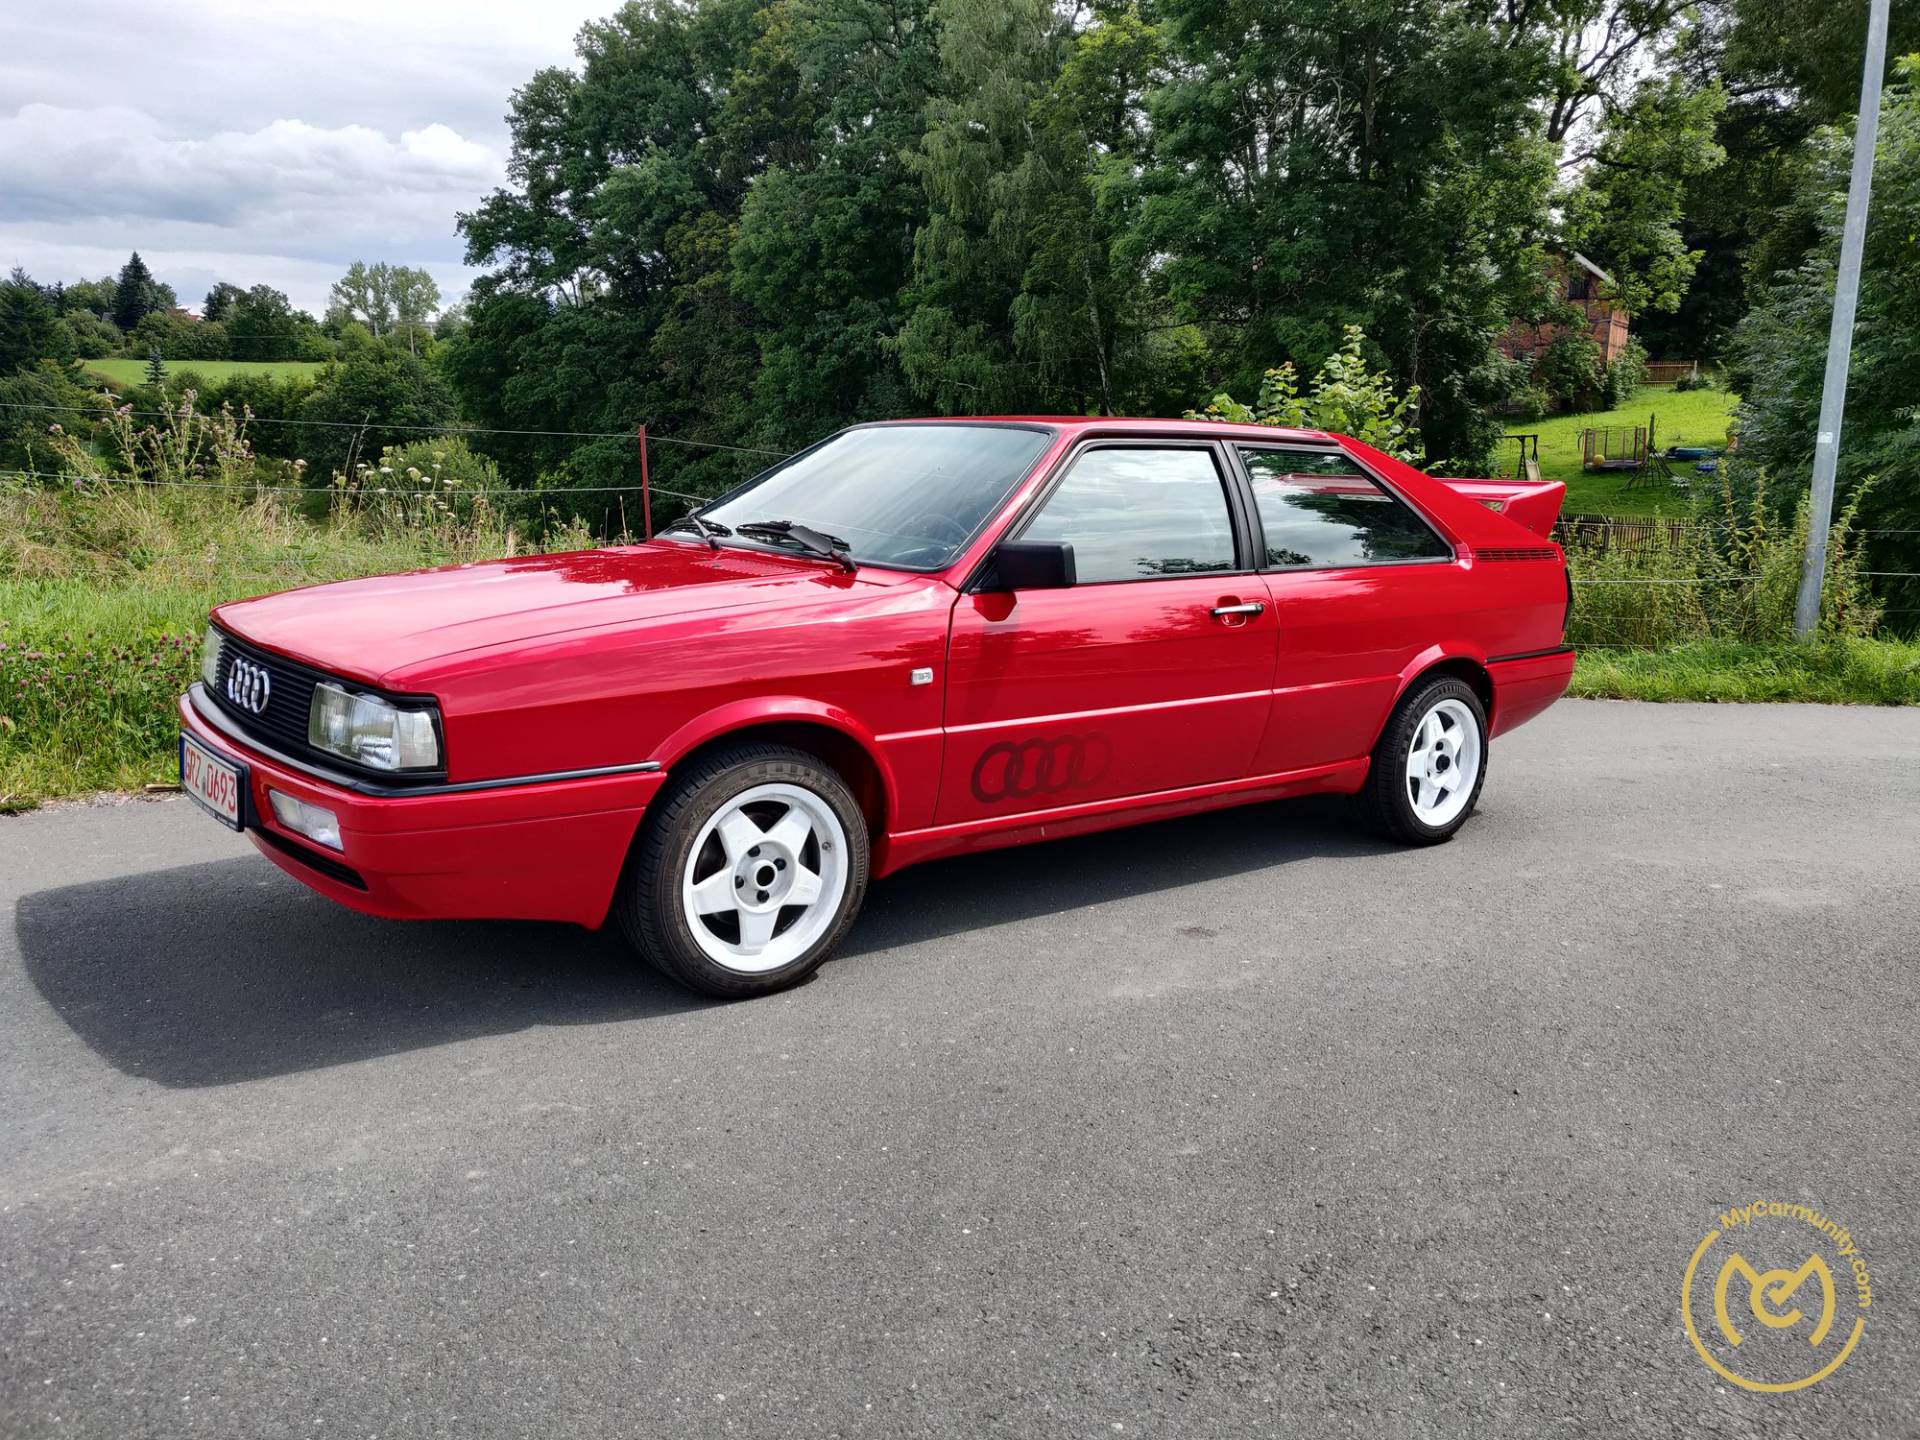 Audi 80 Classic Cars for Sale - Classic Trader